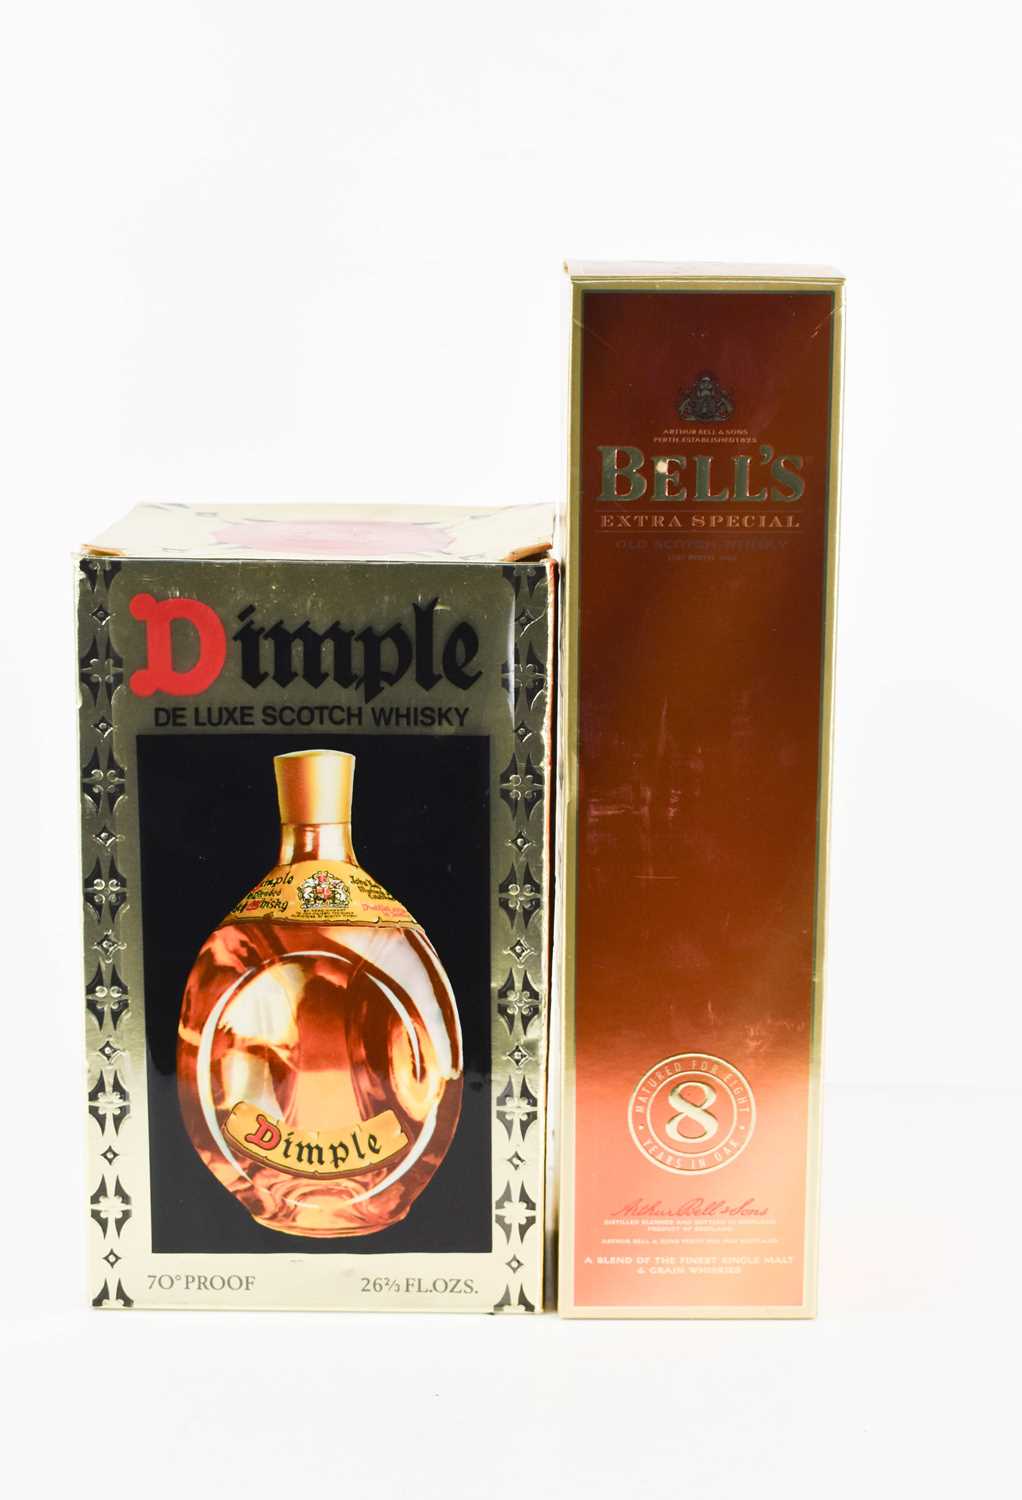 A bottle of Haig Dimple De Luxe Scotch Whisky 70% proof, boxed, and a bottle of Bells Extra